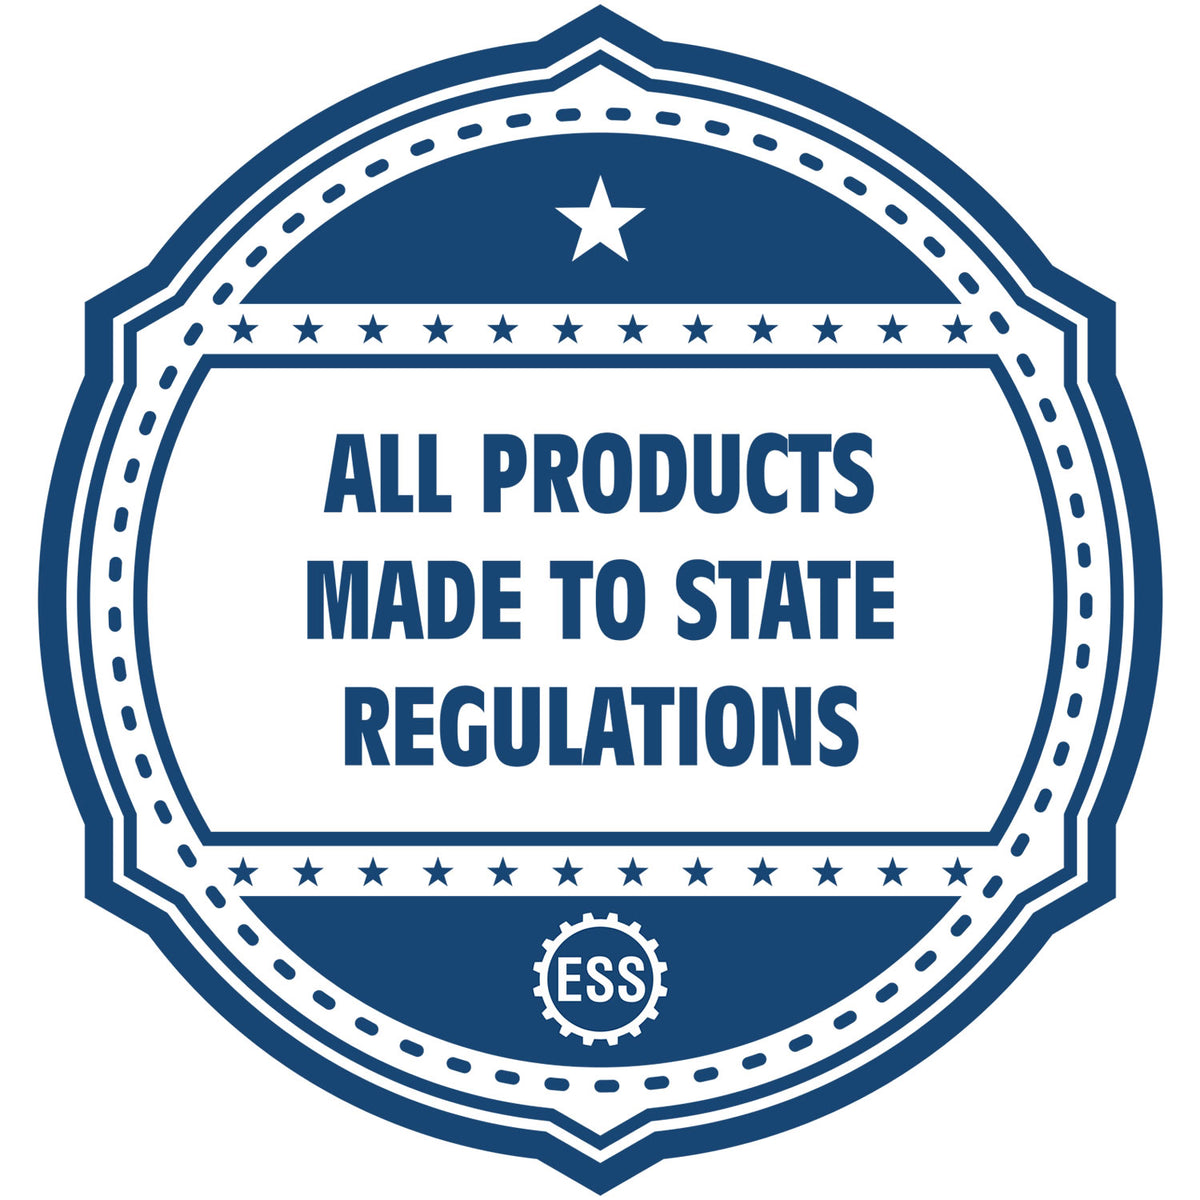 An icon or badge element for the Extended Long Reach Vermont Architect Seal Embosser showing that this product is made in compliance with state regulations.